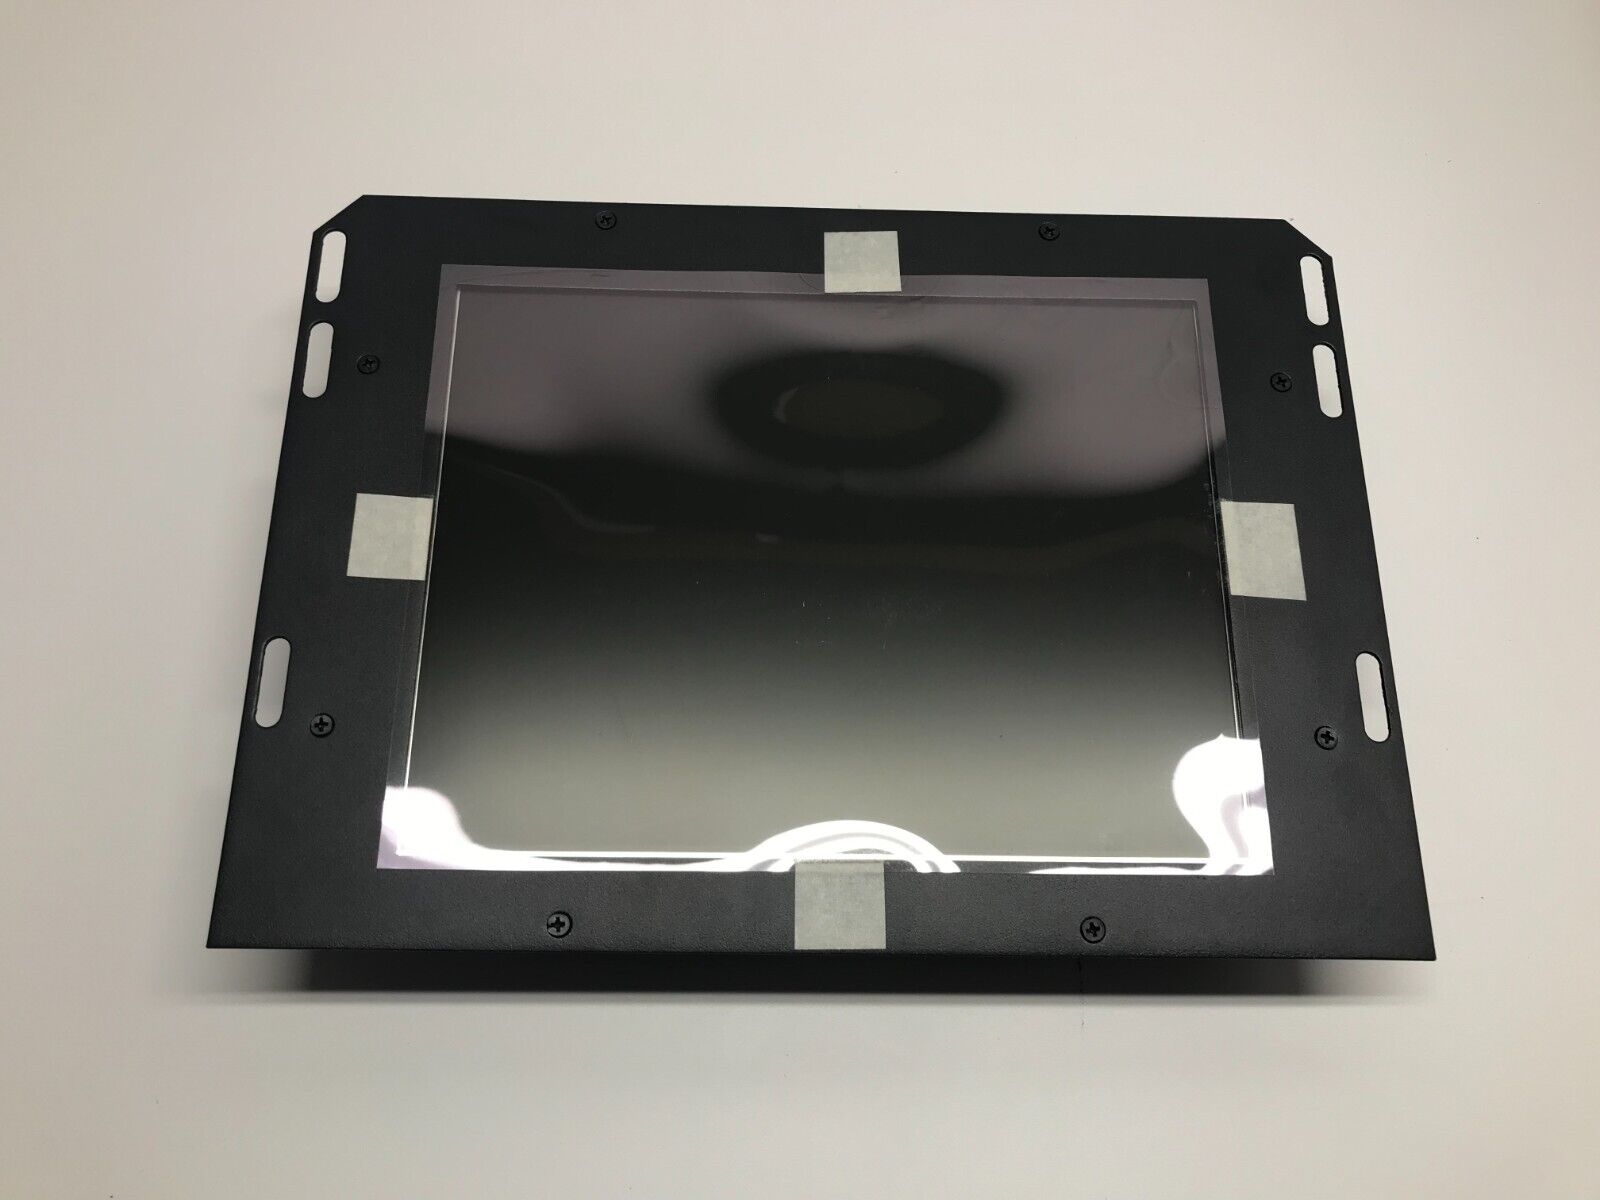 DIRECT REPLACEMEMT LCD MONITOR FOR FANUC A02B-0200-C072/MBR CRT/MDI UNIT